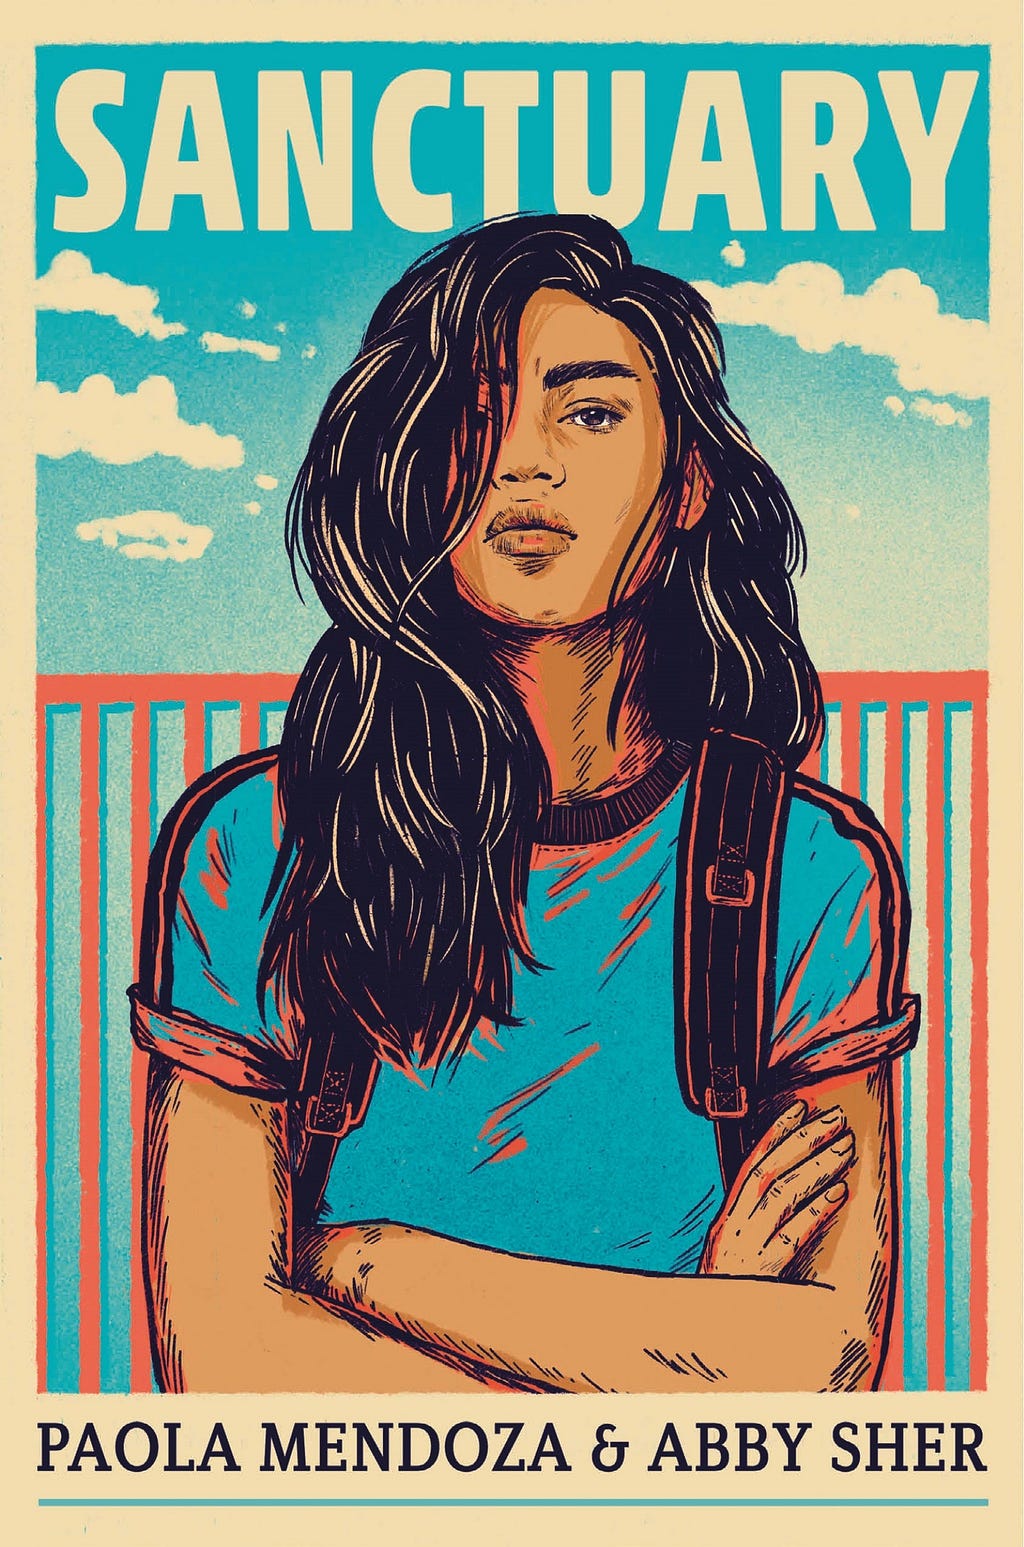 Drawing of a young girl against a red fence and blue sky behind her. Sanctuary in block letter above her.